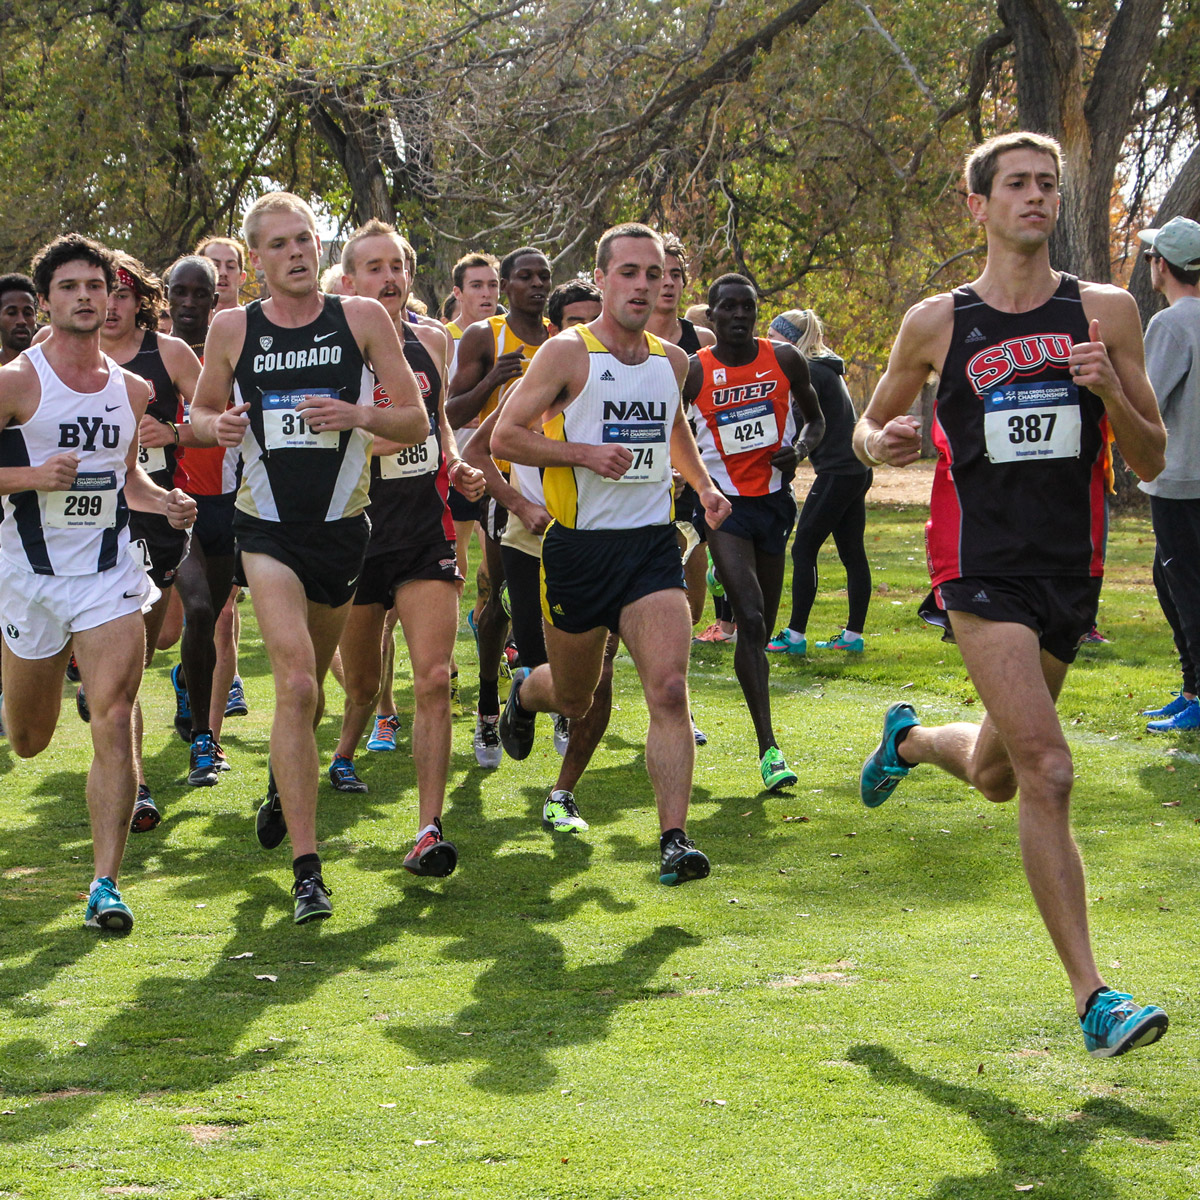 Nate Jewkes races at 2014 Mountain Regional Championships.